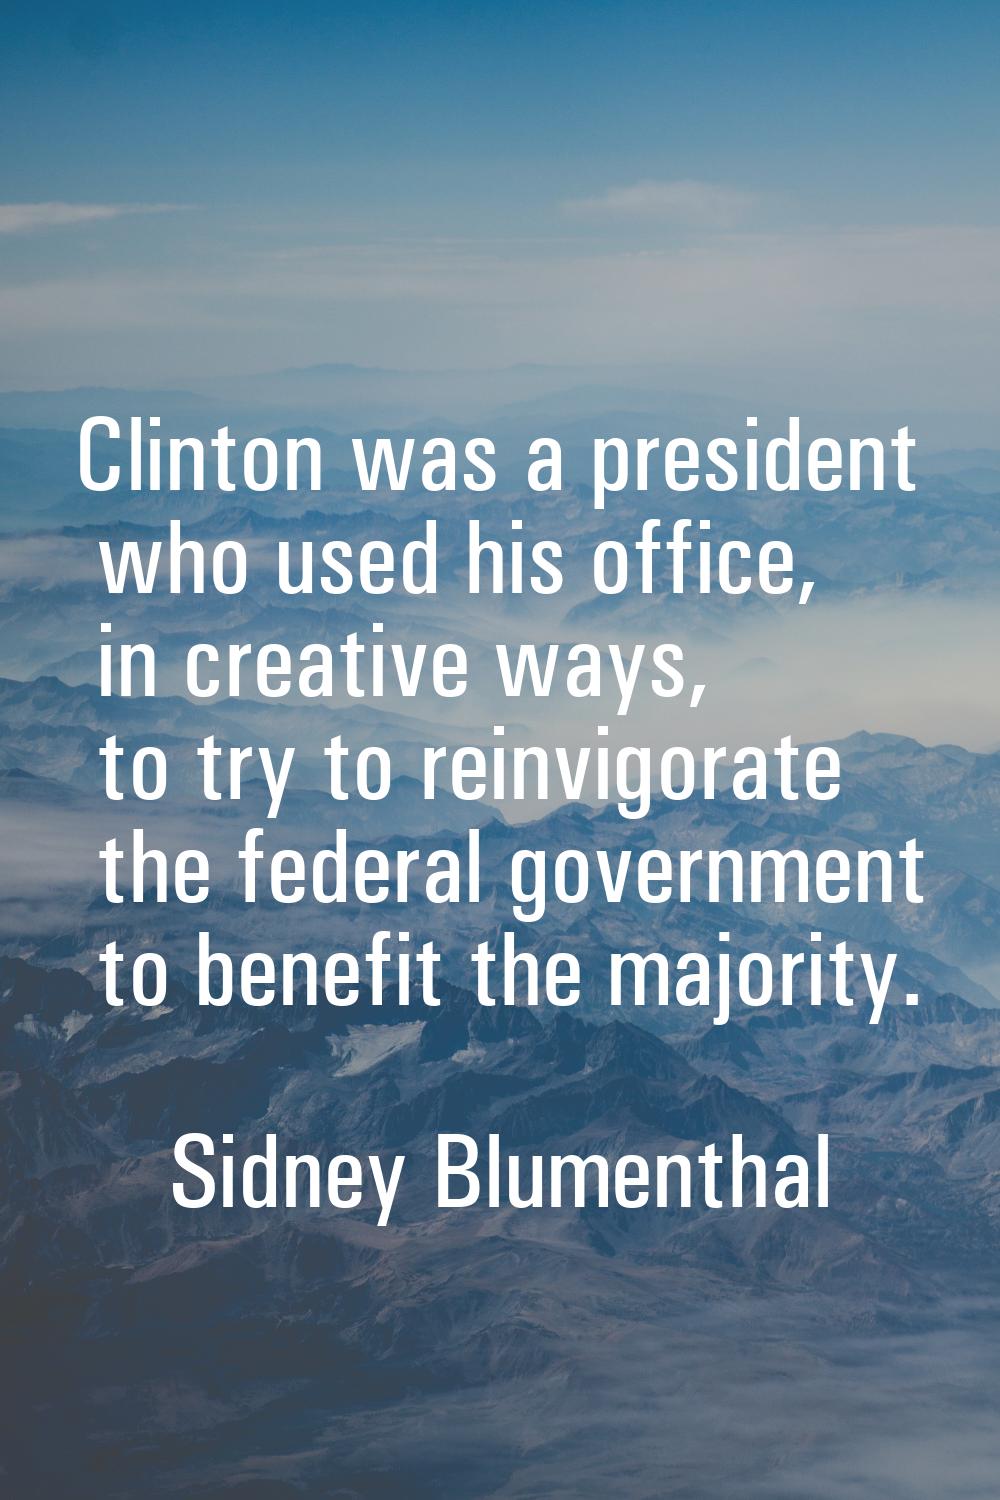 Clinton was a president who used his office, in creative ways, to try to reinvigorate the federal g